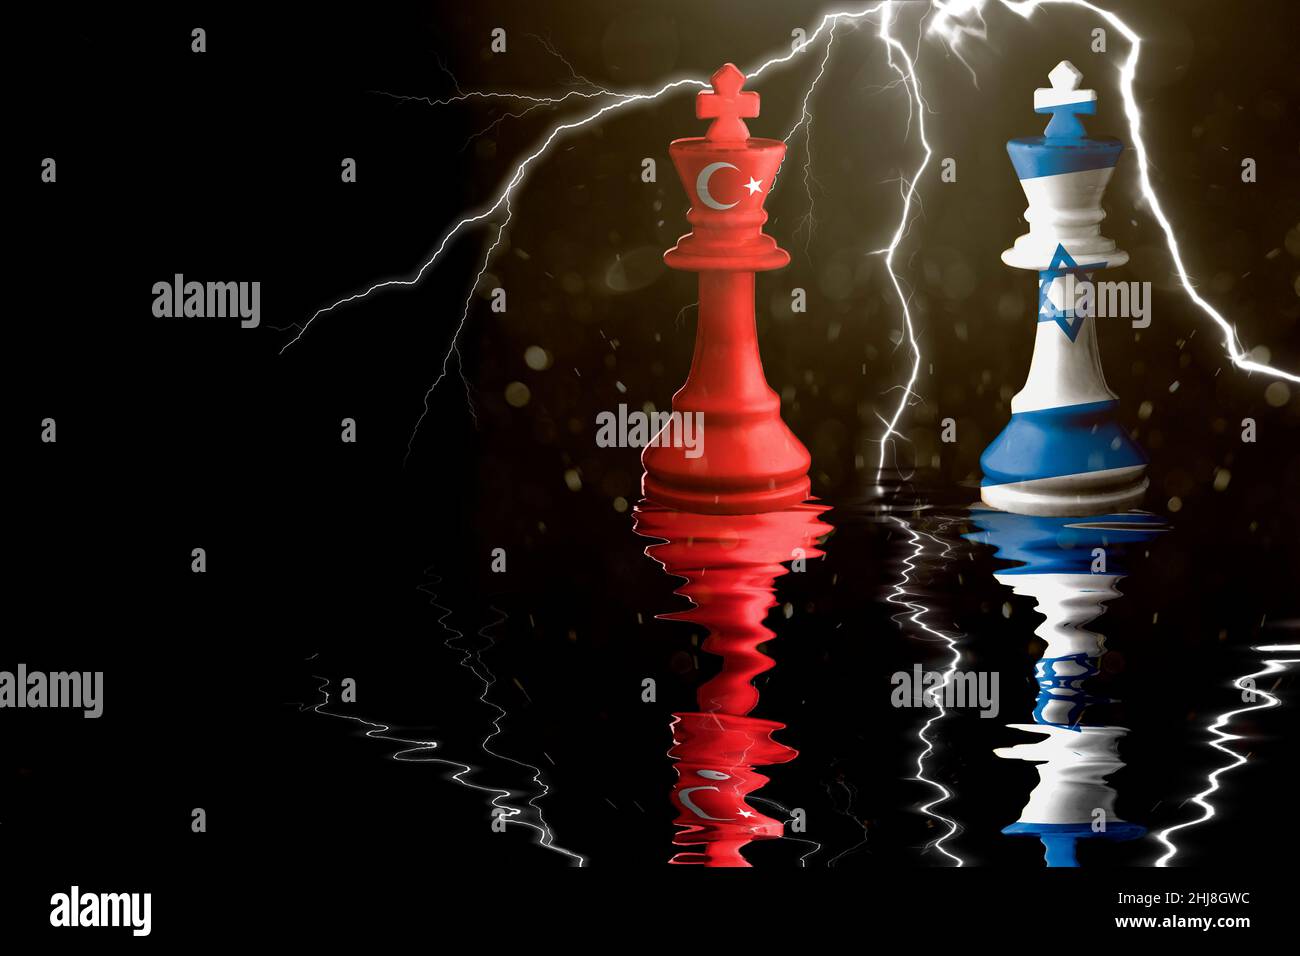 israel and turkey flags paint over on chess king. 3D illustration and israel vs turkey crisis. Stock Photo